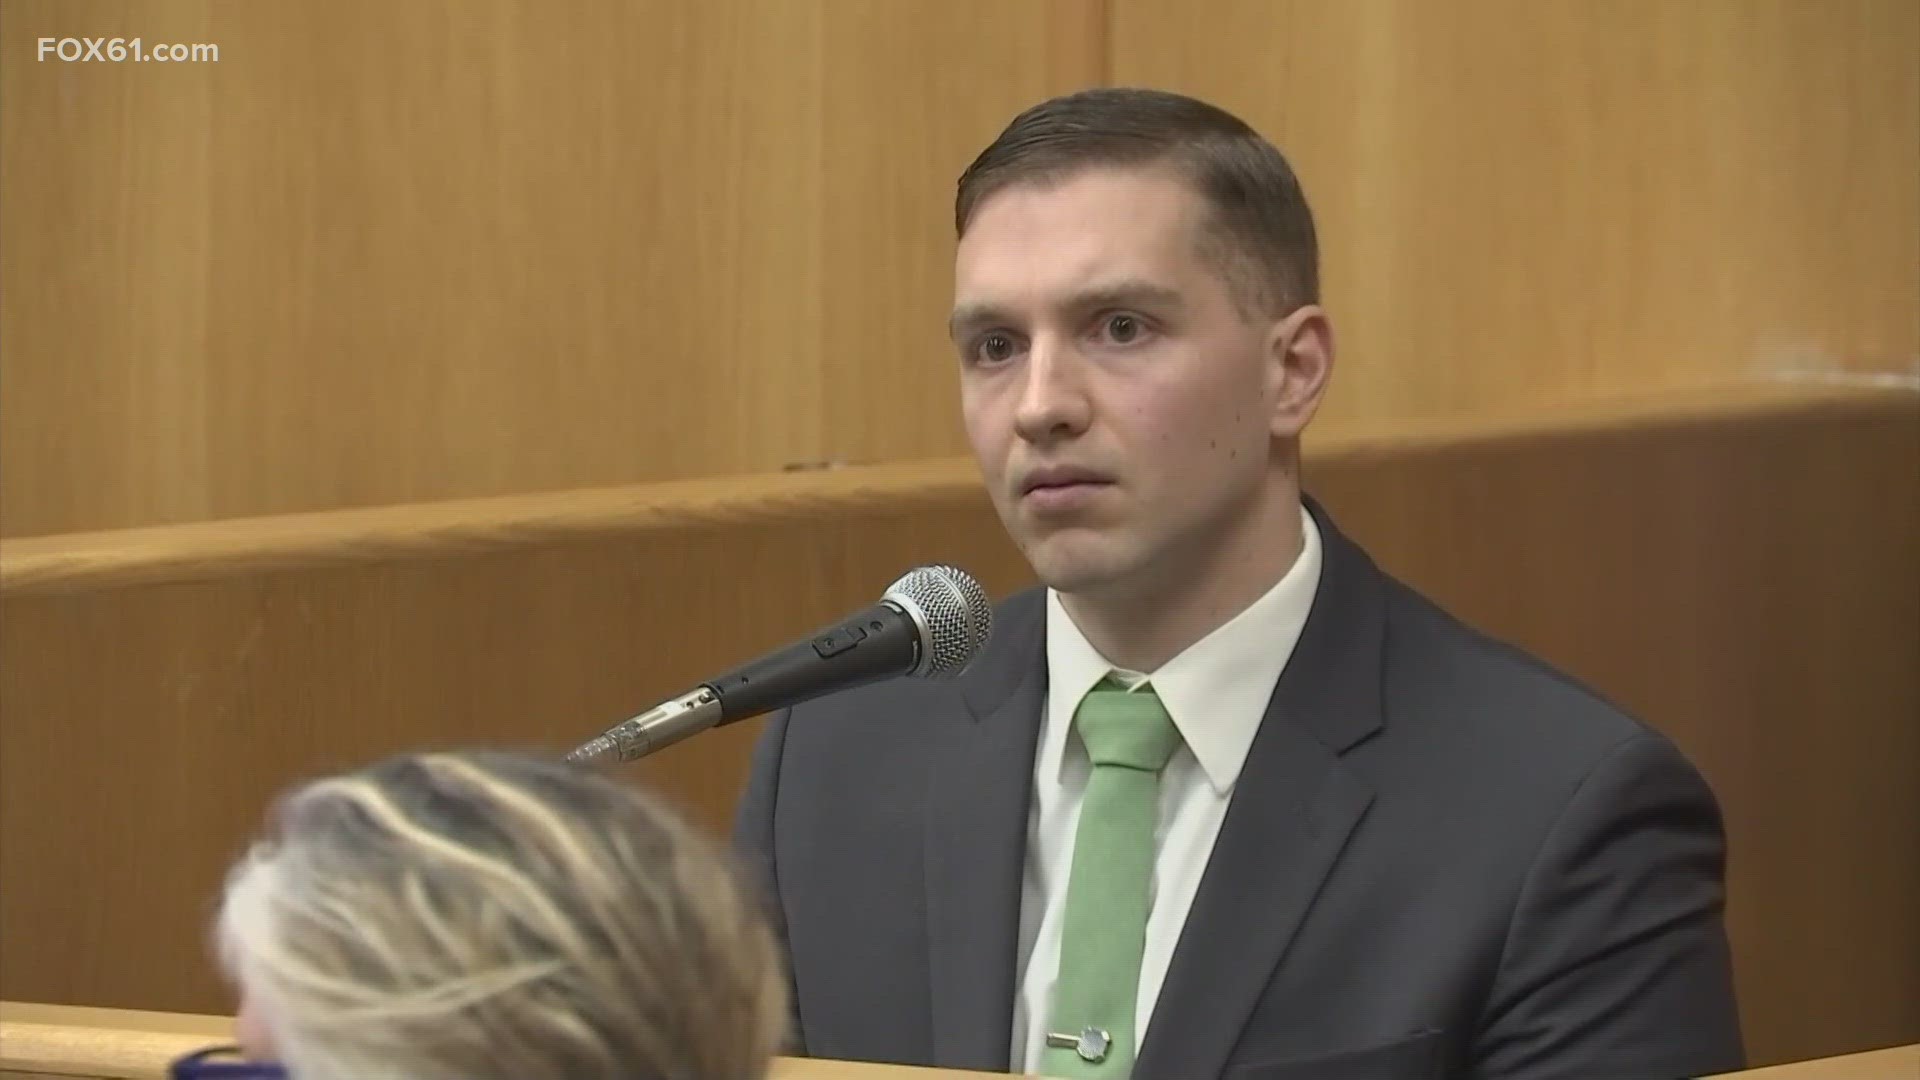 Trooper Brian North, 33, took the stand during his trial in Milford on a charge of first-degree manslaughter with a firearm.